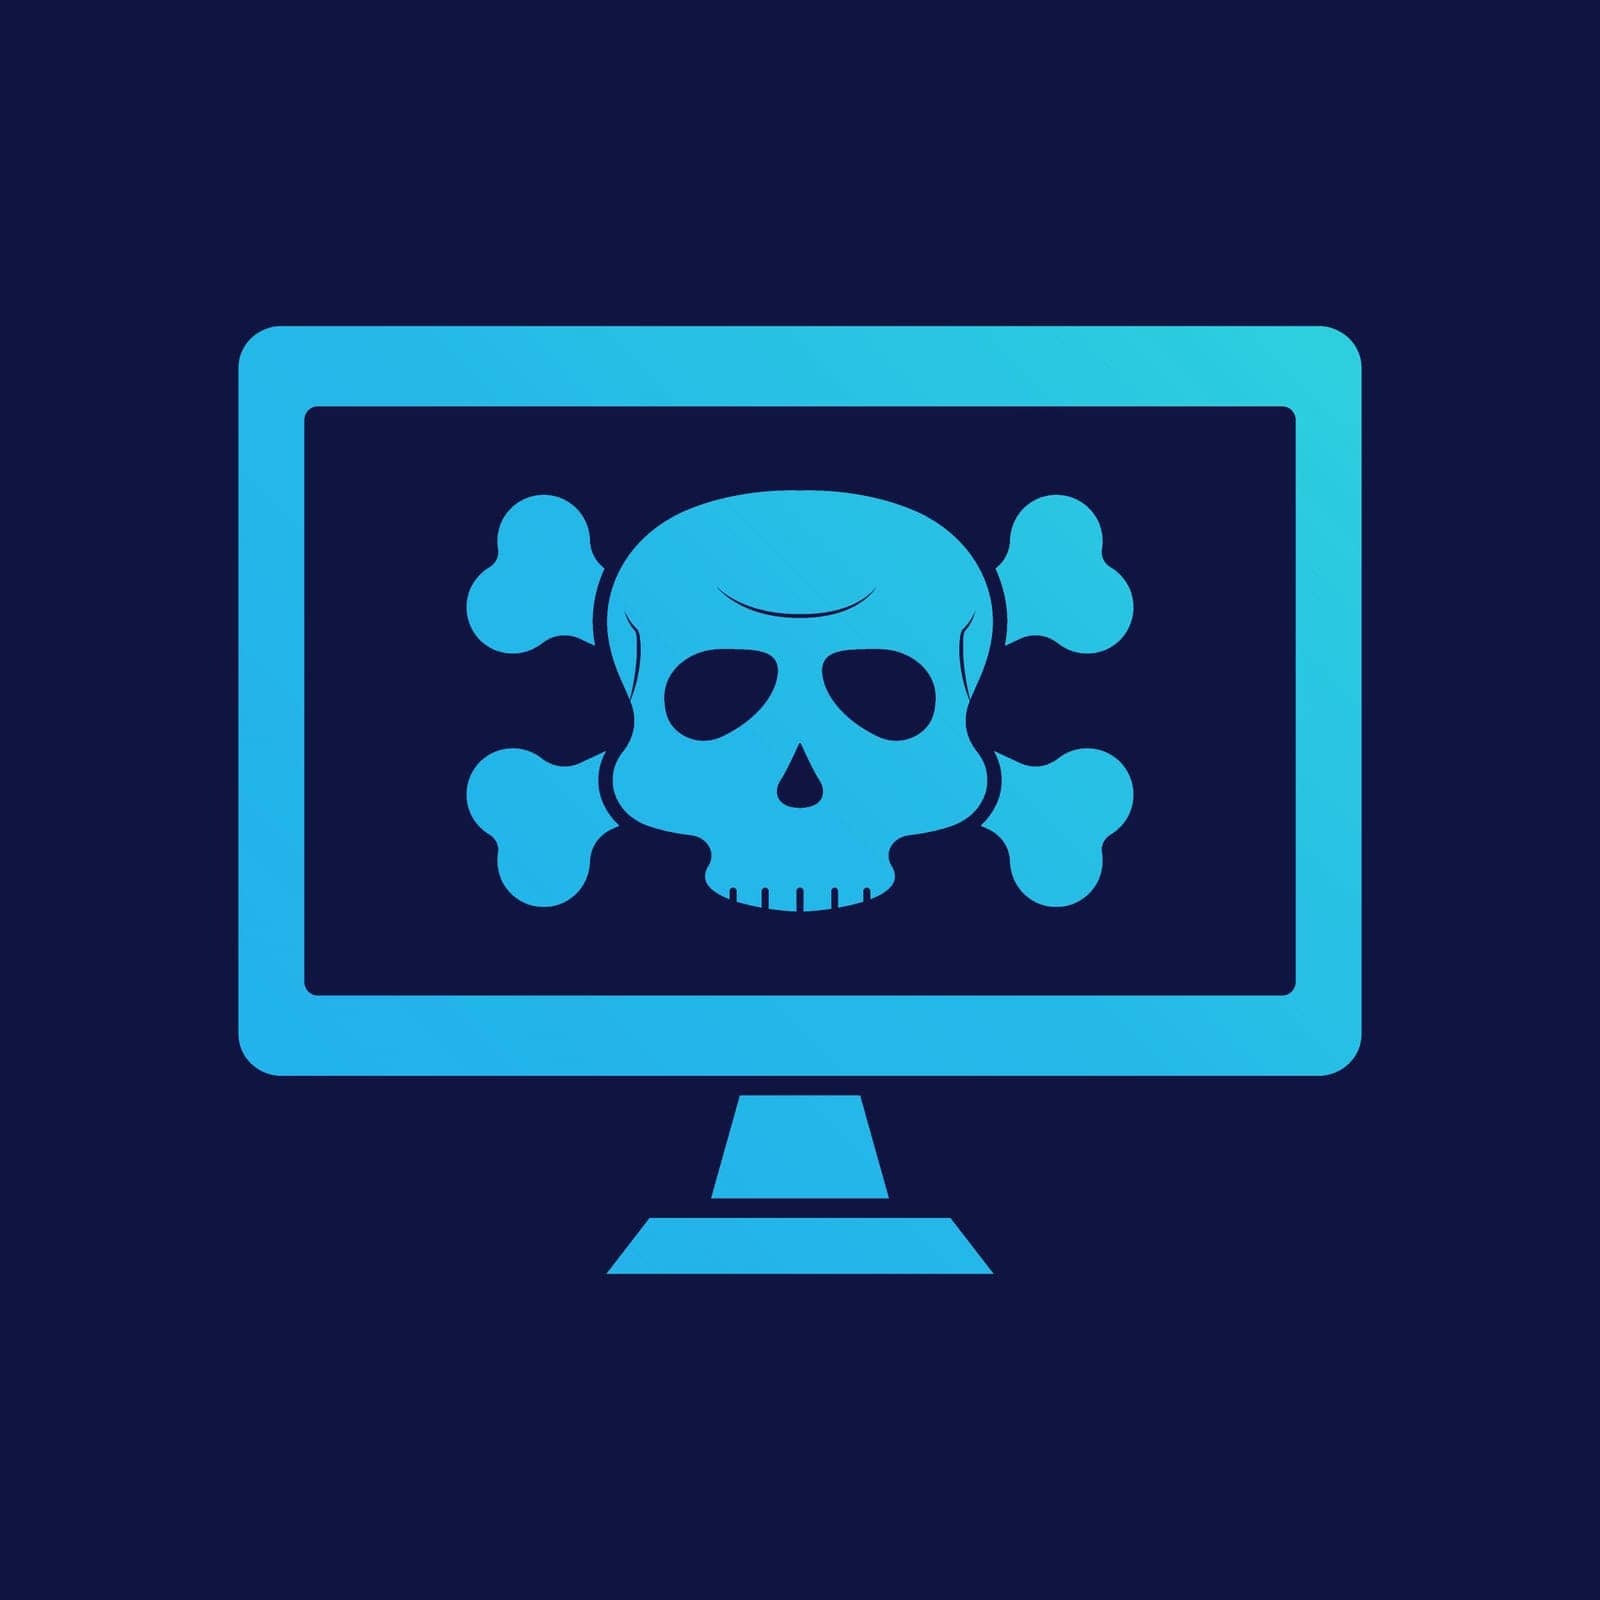 Virus Alert Icon. Computer with Virus. Cyber Attack Alert Icon with Skull. Phishing Scam concept. Hacker Attack, Phishing and Fraud. Vector illustration by Toxa2x2